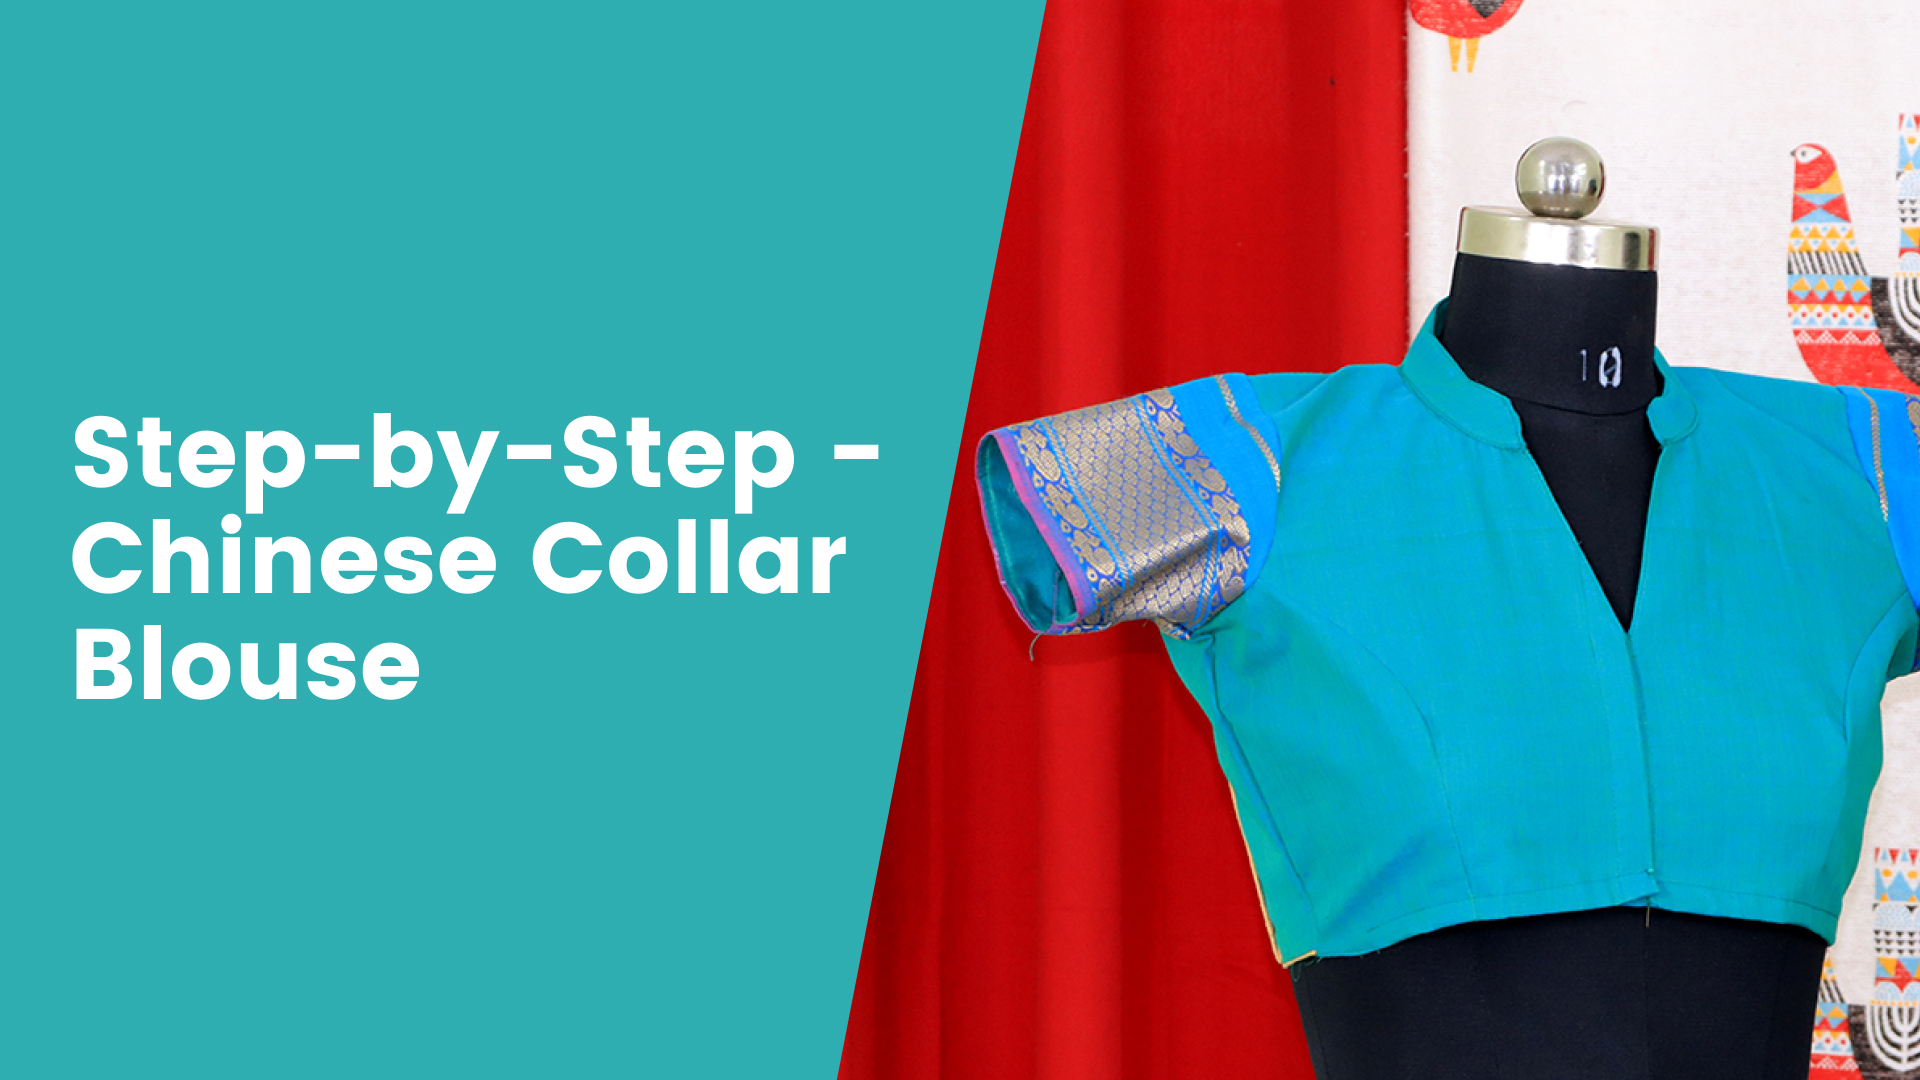 Course Trailer: Learn to Stitch a Chinese Collar Blouse. Watch to know more.